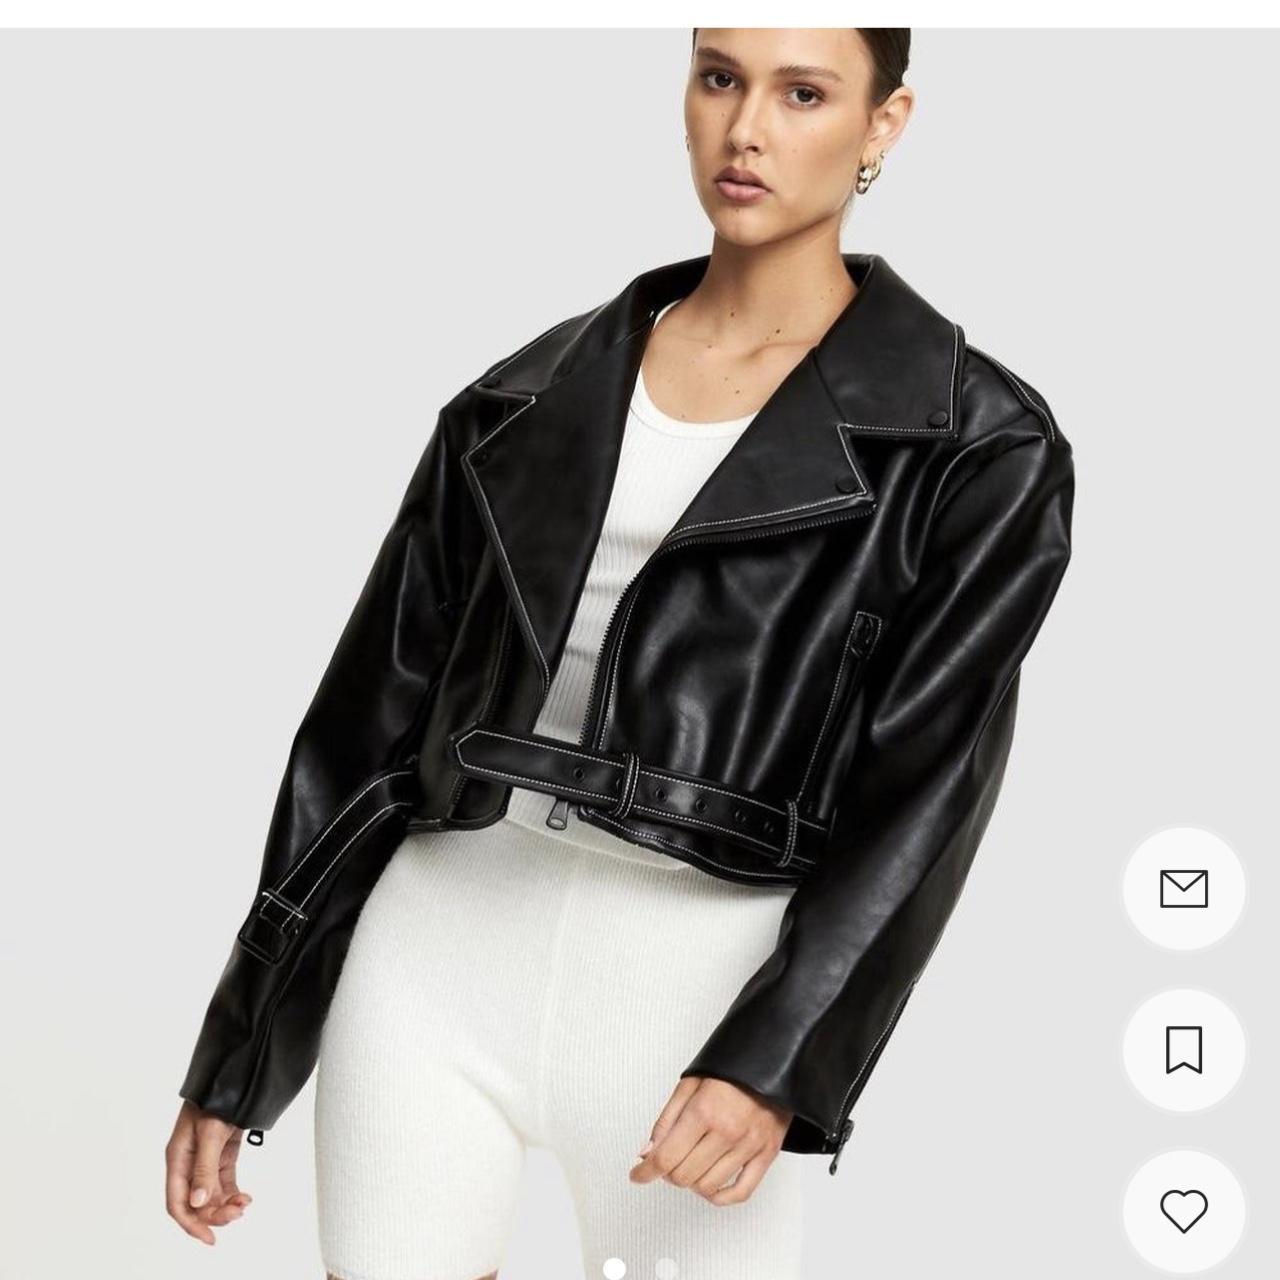 Lioness Staten Island leather jacket with white... - Depop